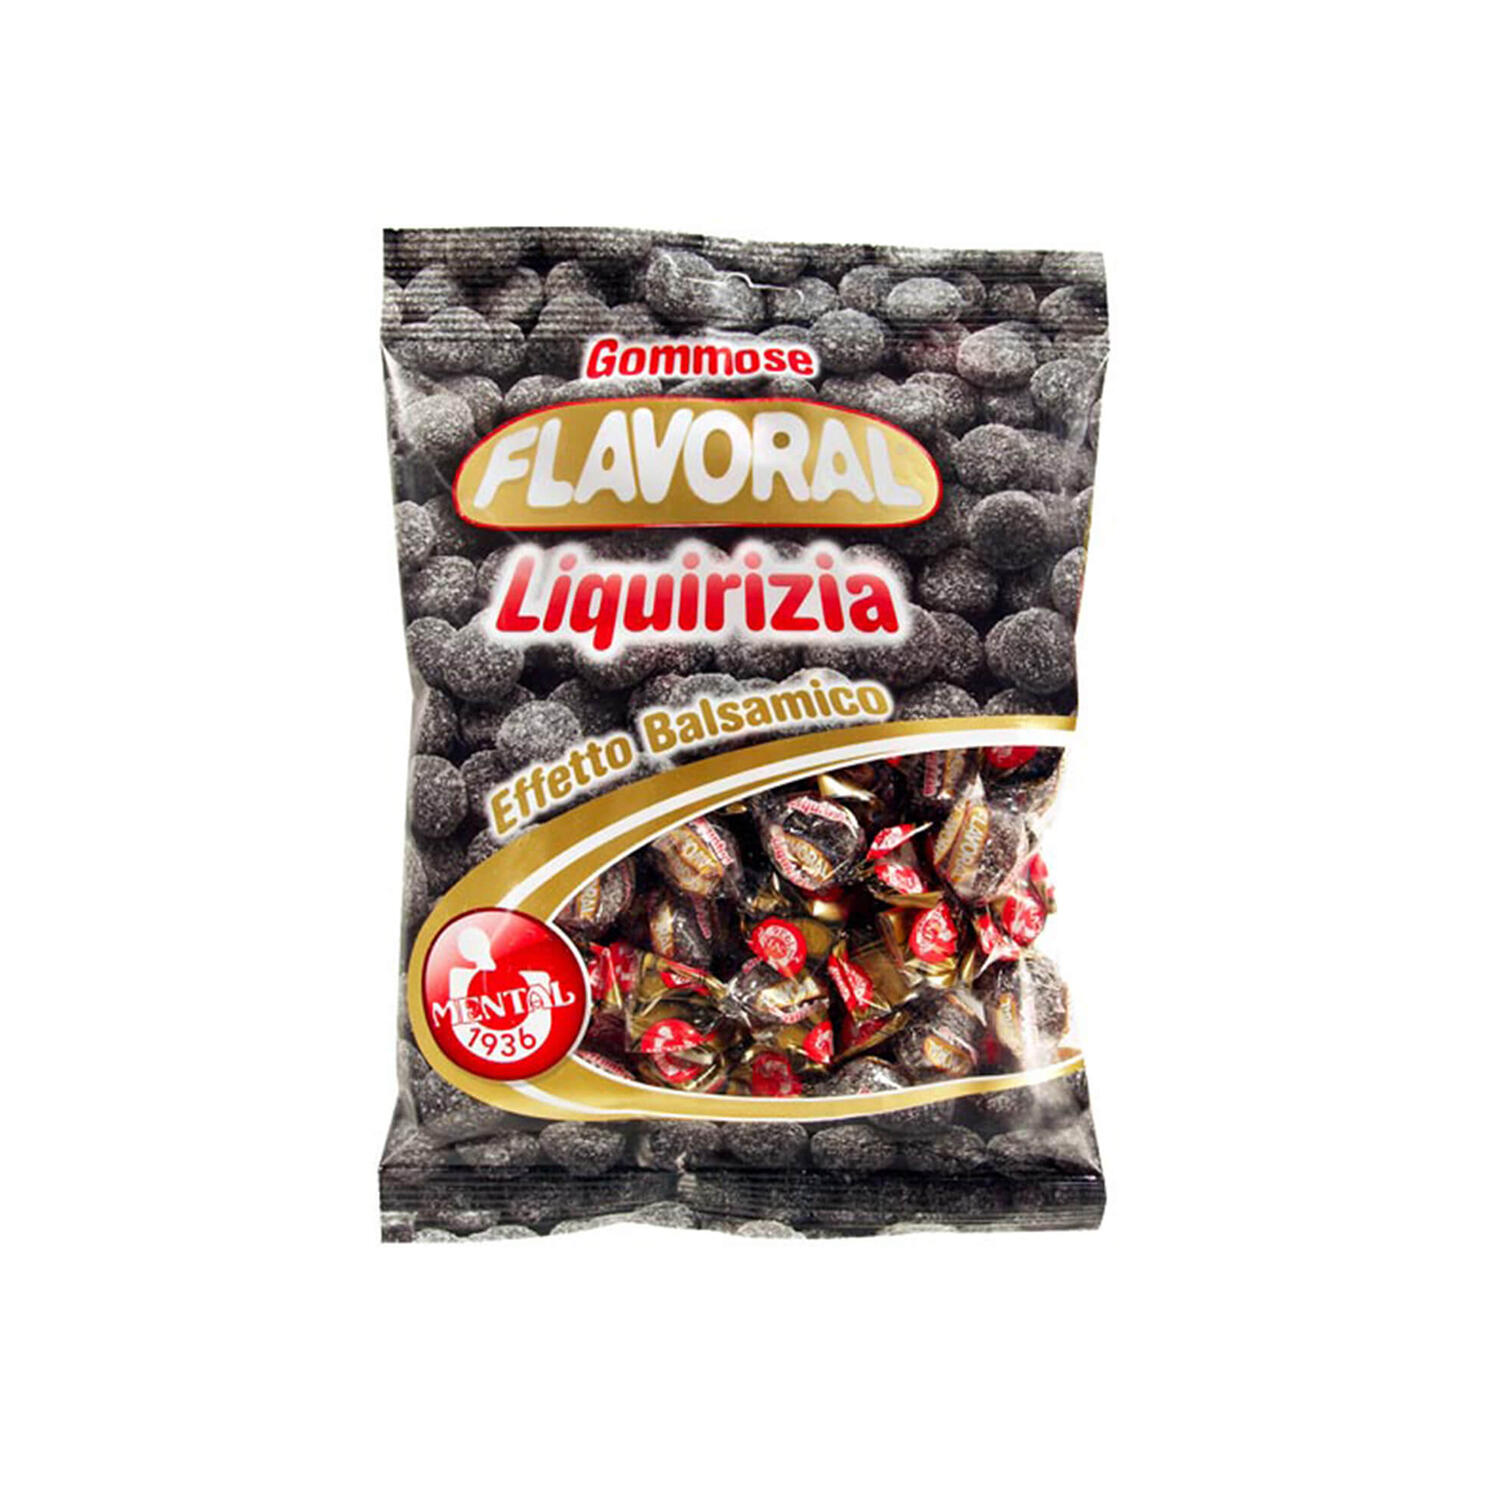 Licorice Flavoral Large Packet - Multi Pack 12PCS - Large Packets